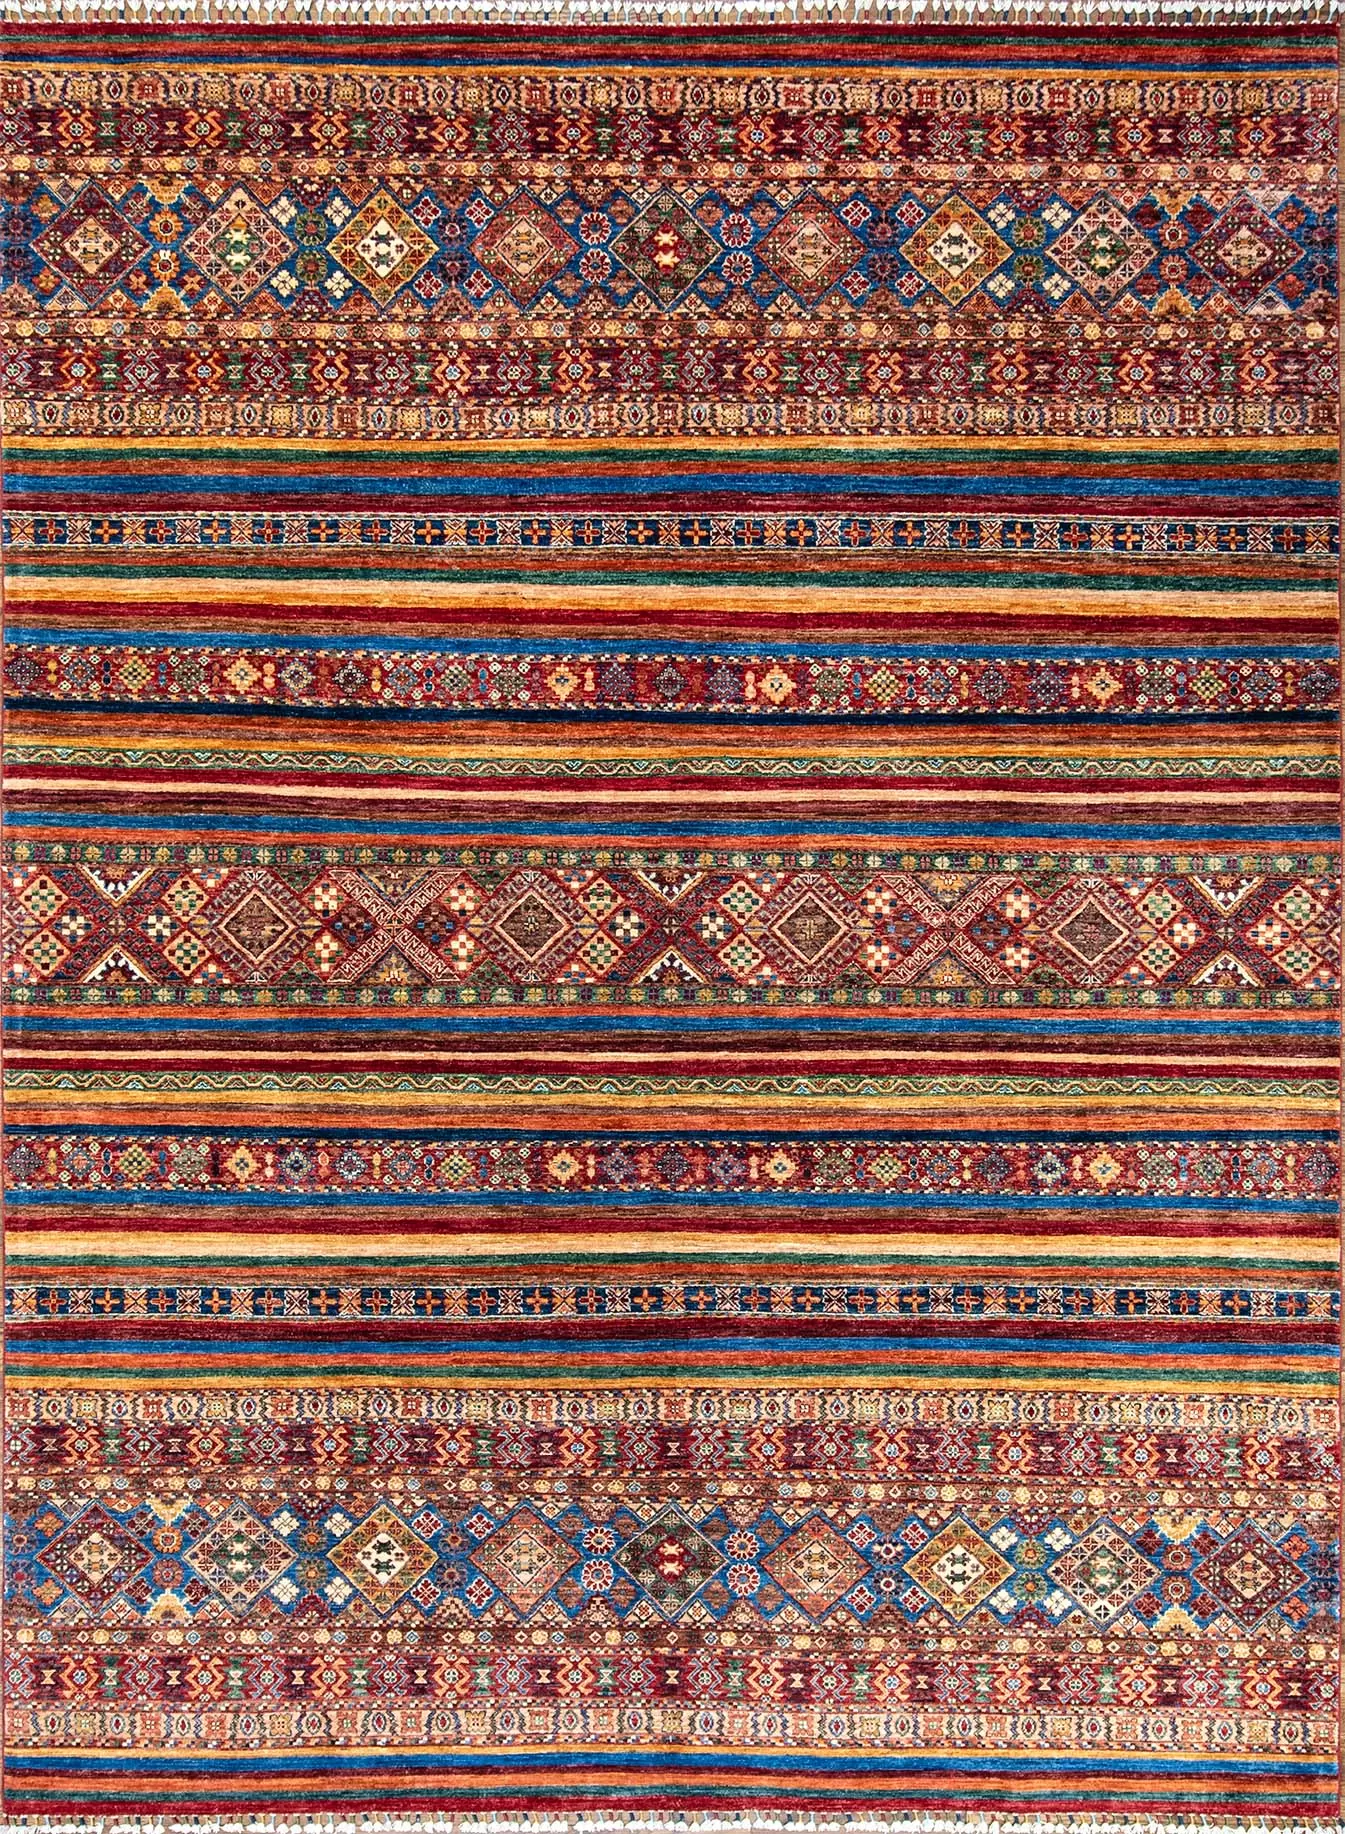 Handmade Afghan tribal area rug style with stripes, multicolor and made of wool. Size 9.3x11.10.